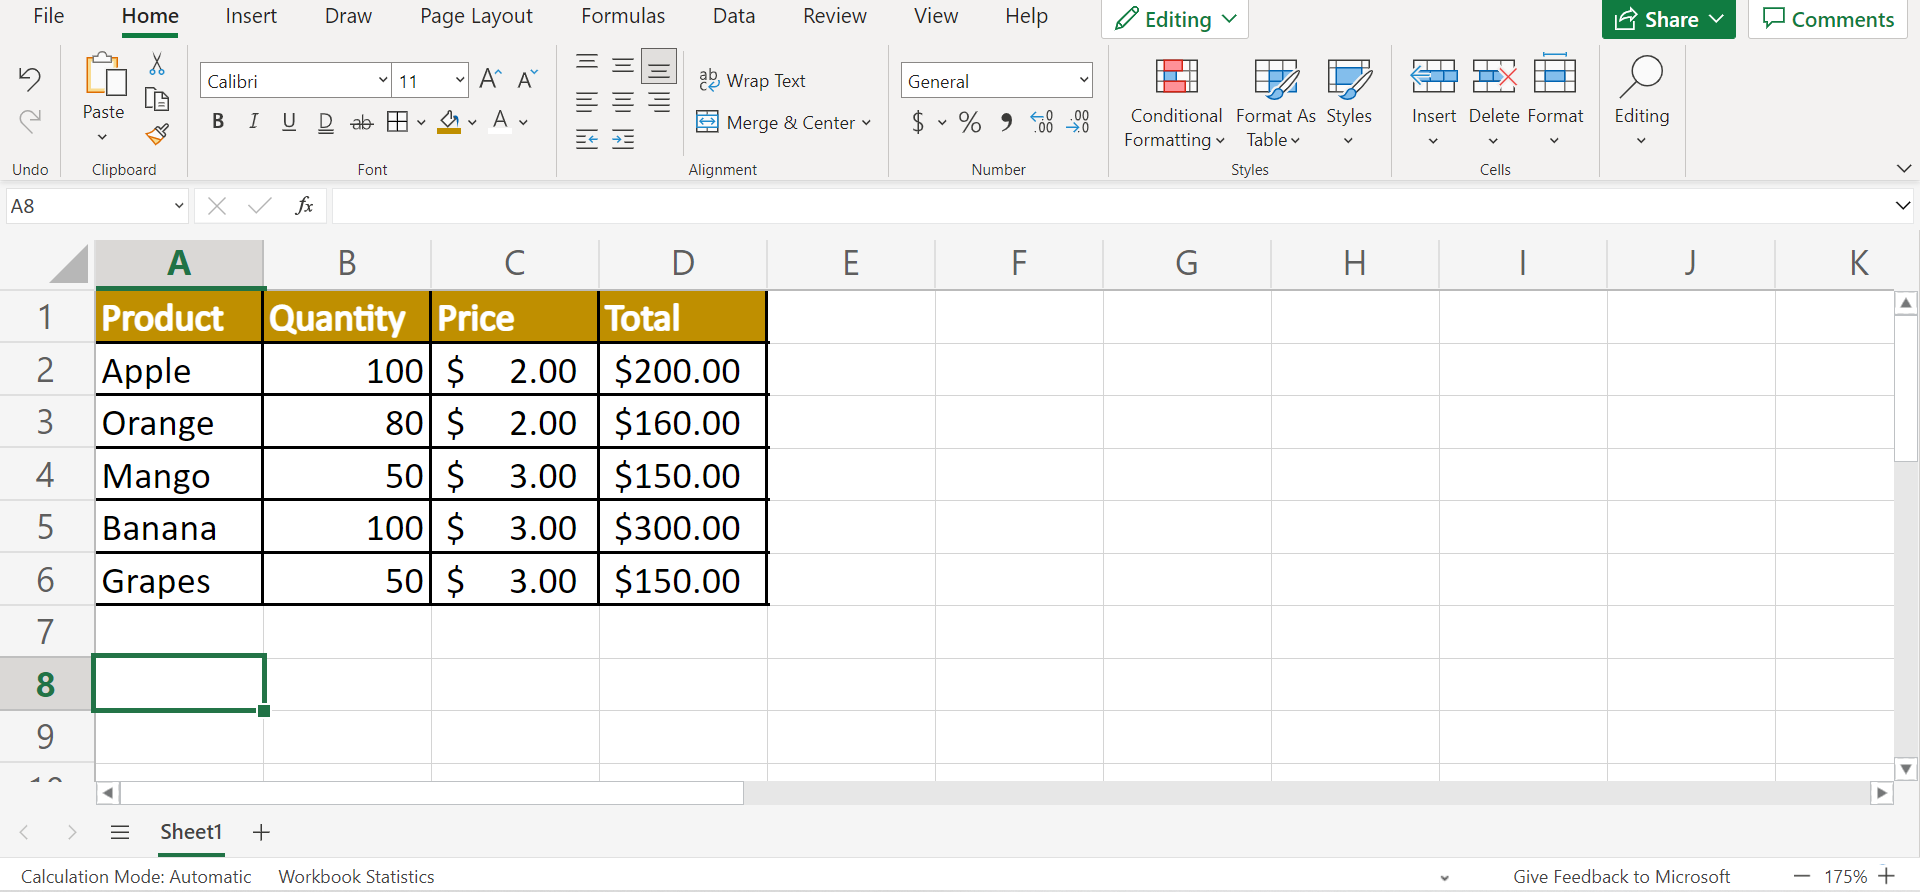 Final output after removing conditional formatting